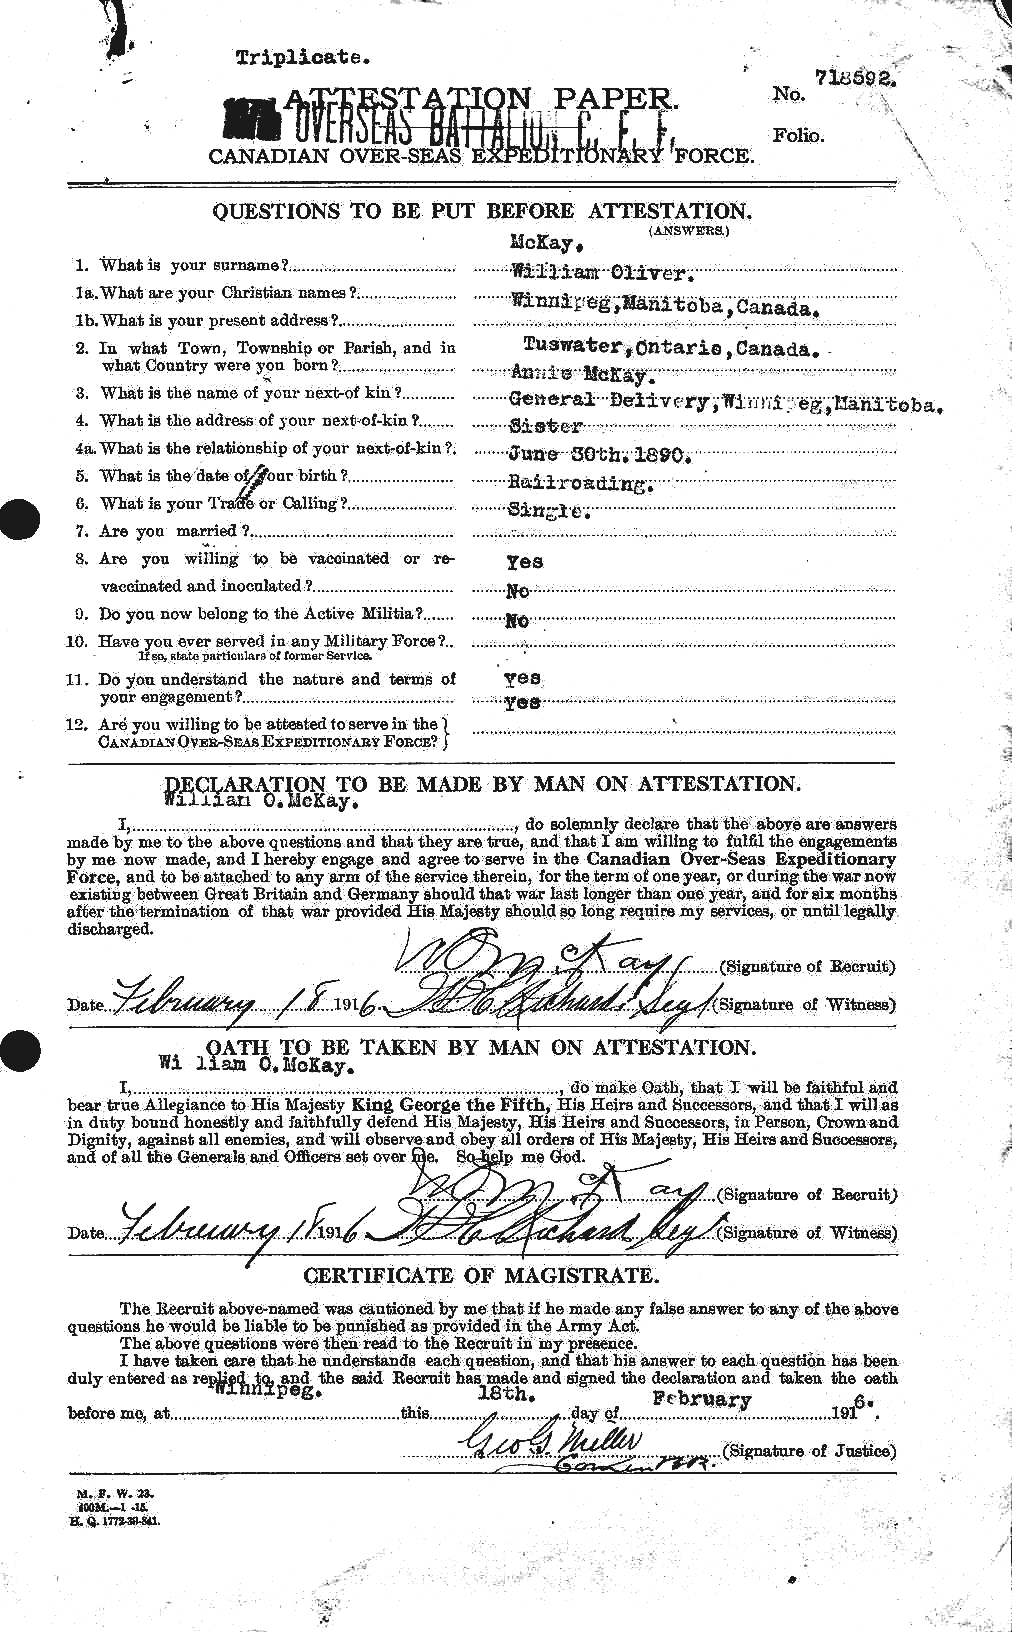 Personnel Records of the First World War - CEF 530310a